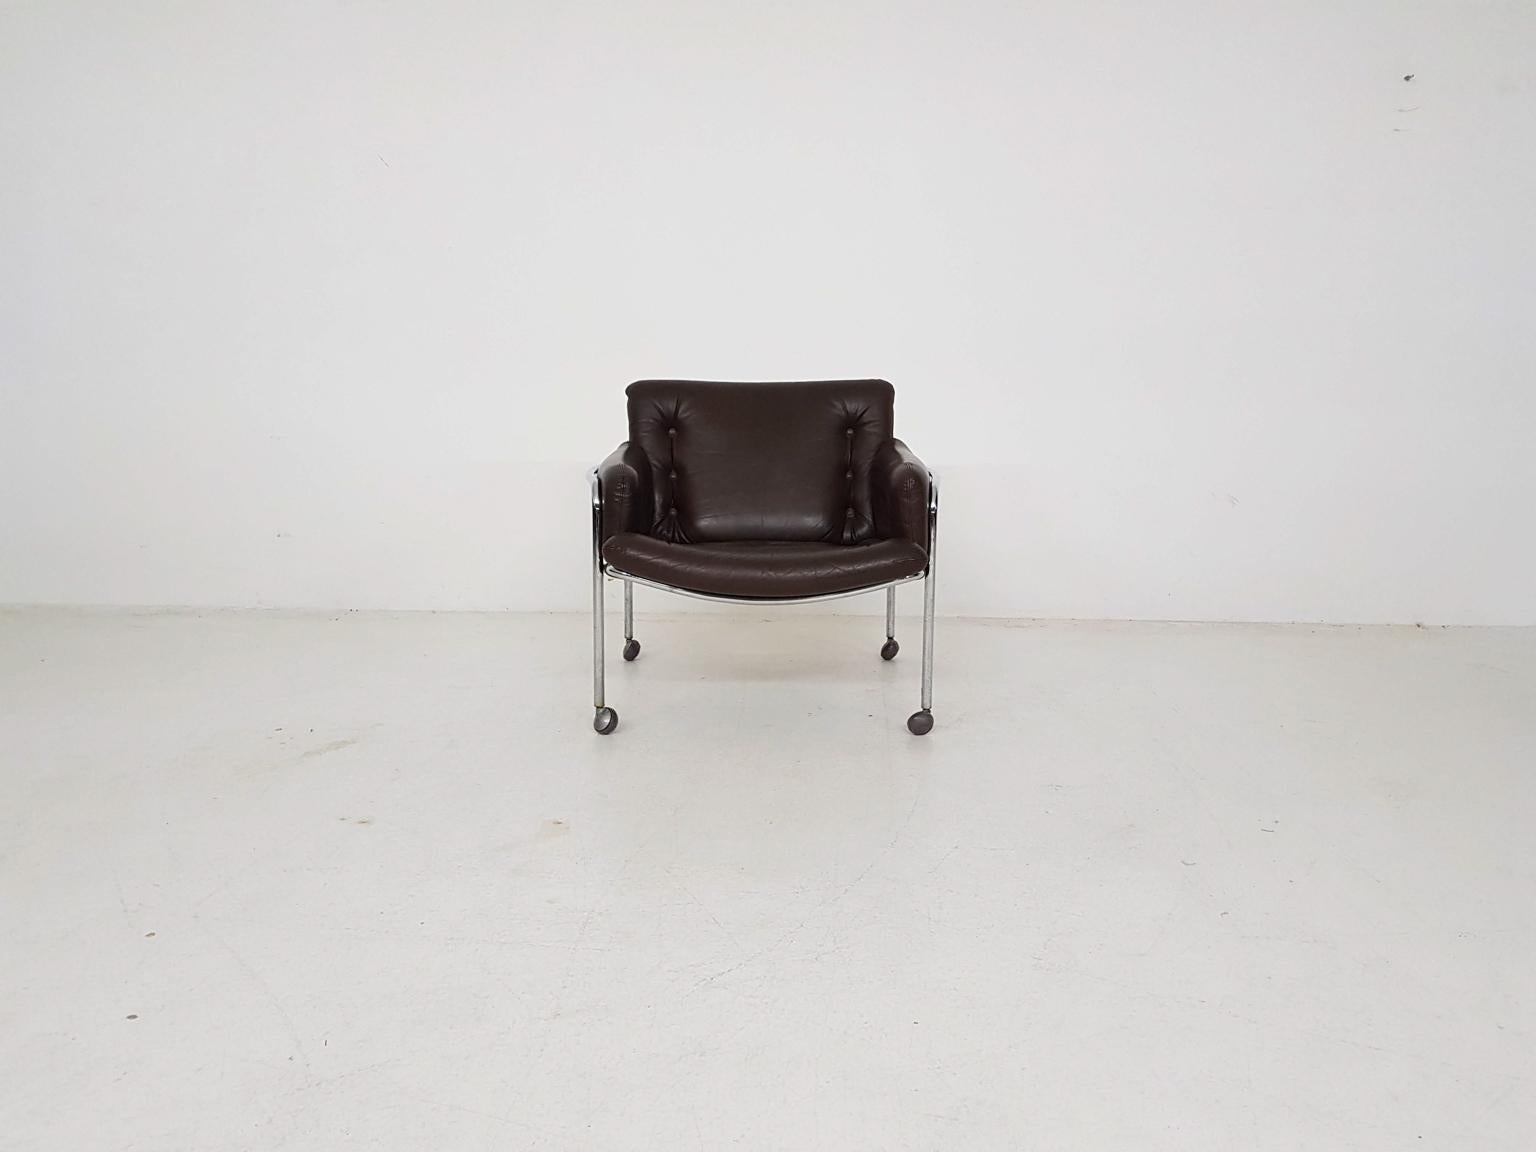 Brown leather lounge chair by Martin Visser for ’t Spectrum model Sz08 “Osaka”, made and designed in The Netherlands in 1969.

Visser designed this lounge chair in 1969 when he was working for Dutch furniture manufacturer ’t Spectrum. This is the